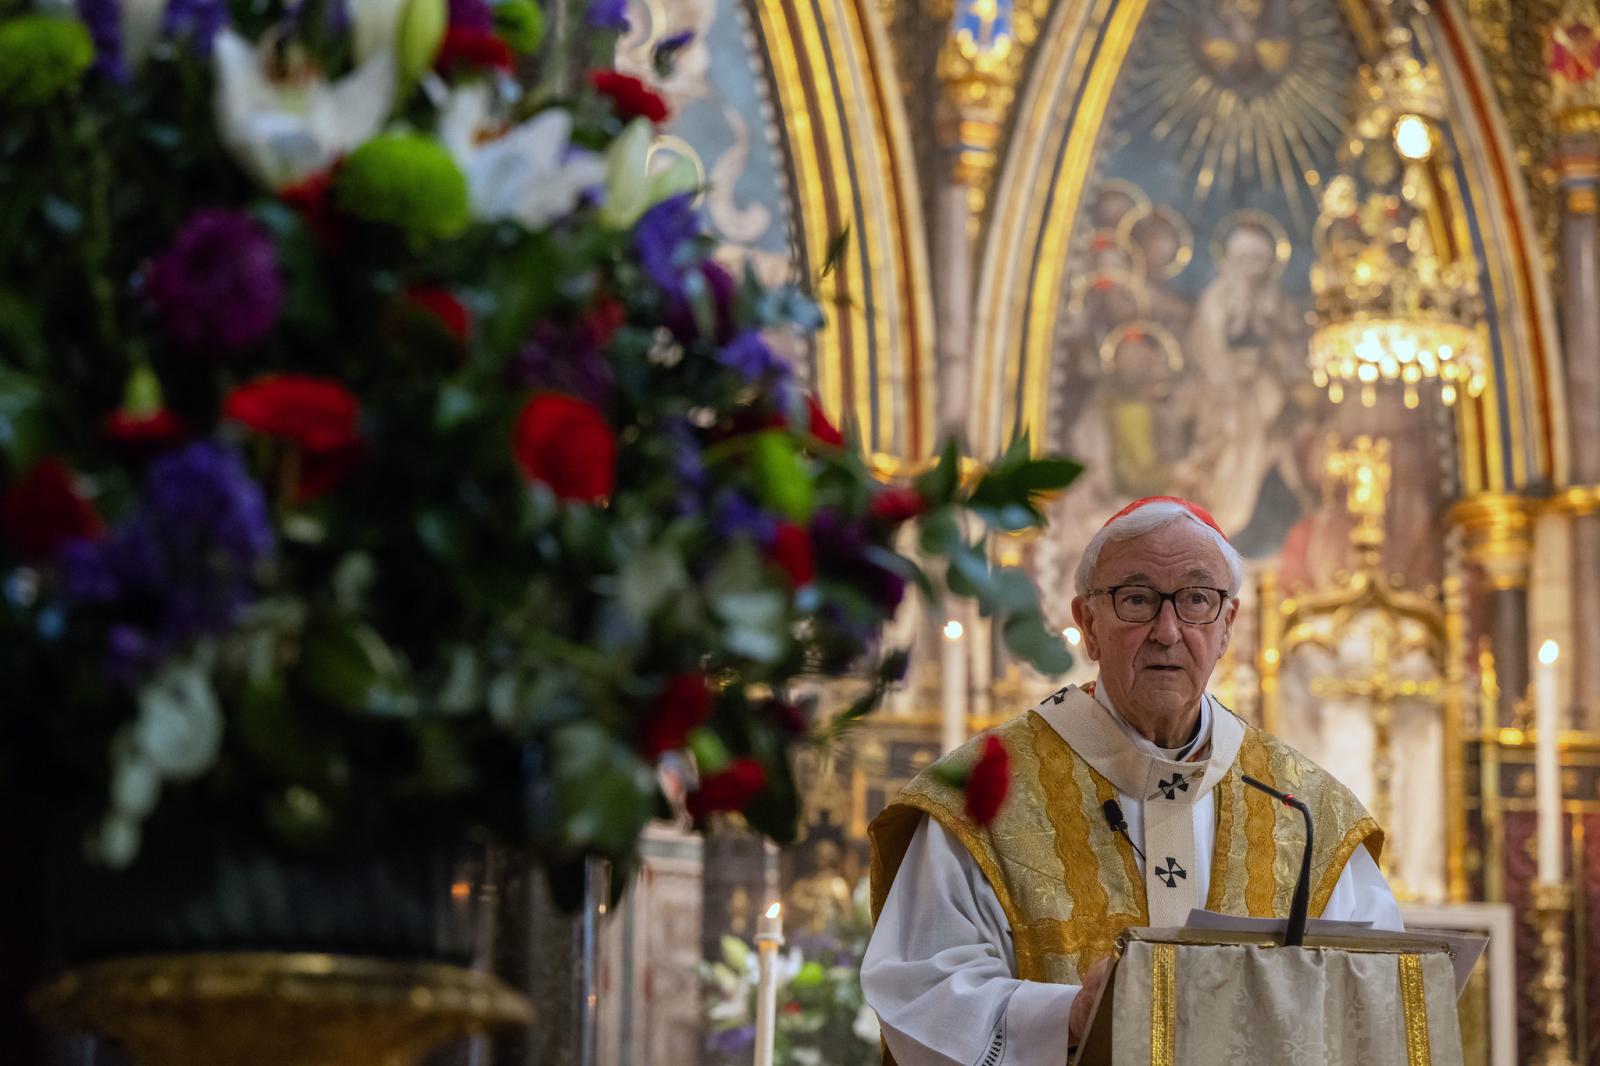 Cardinal's homily for 75th anniversary of consecration of St James, Spanish Place